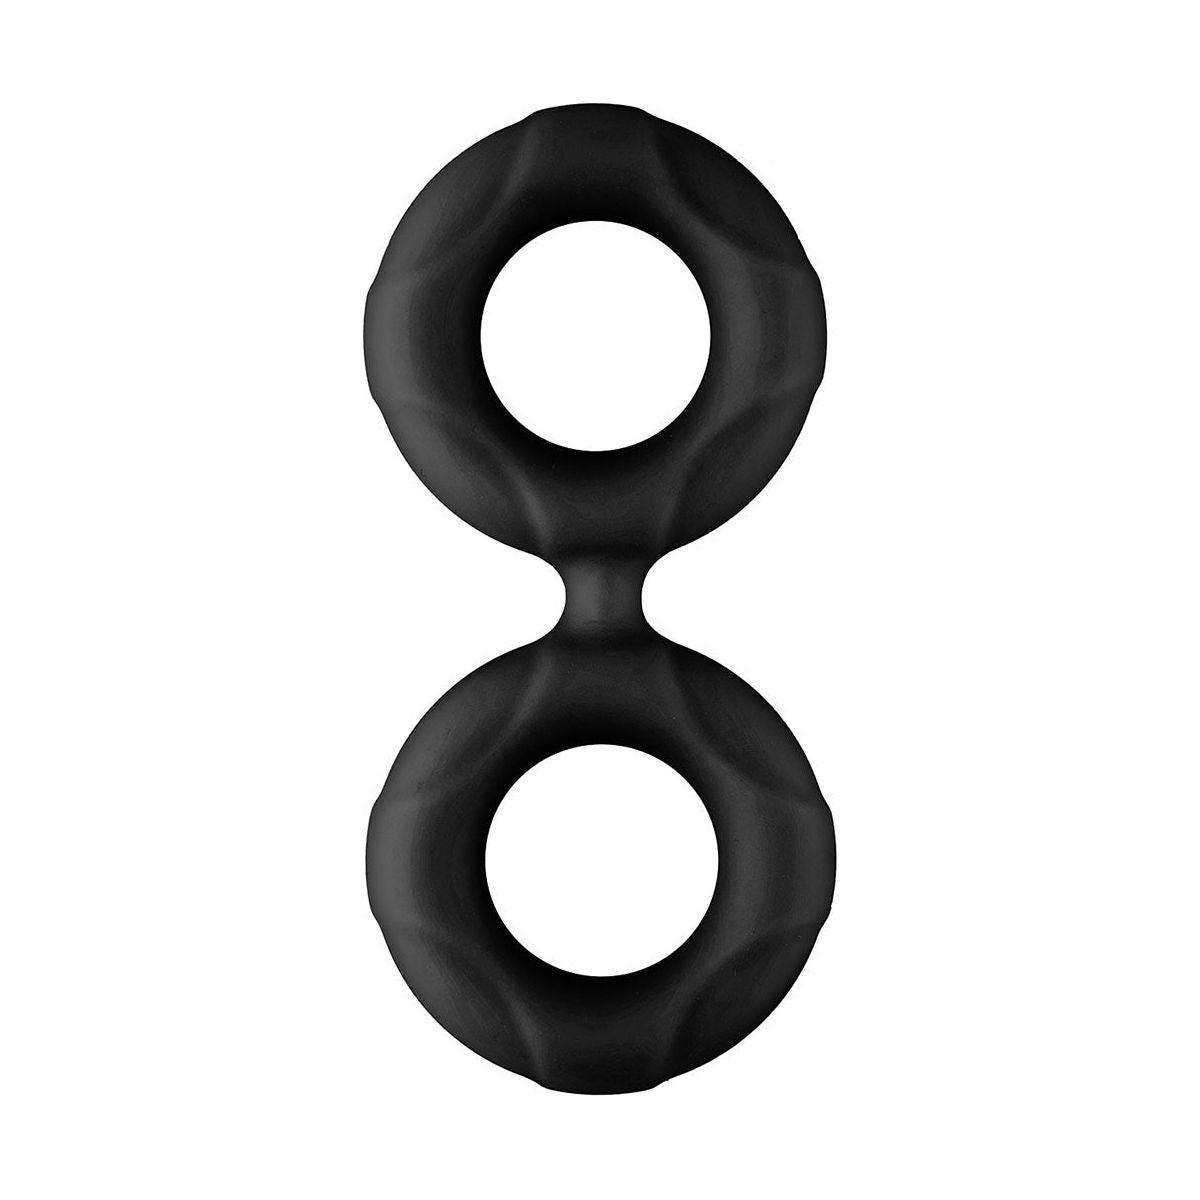 FORTO F-81 47mm Double Ring - Black - shop enby